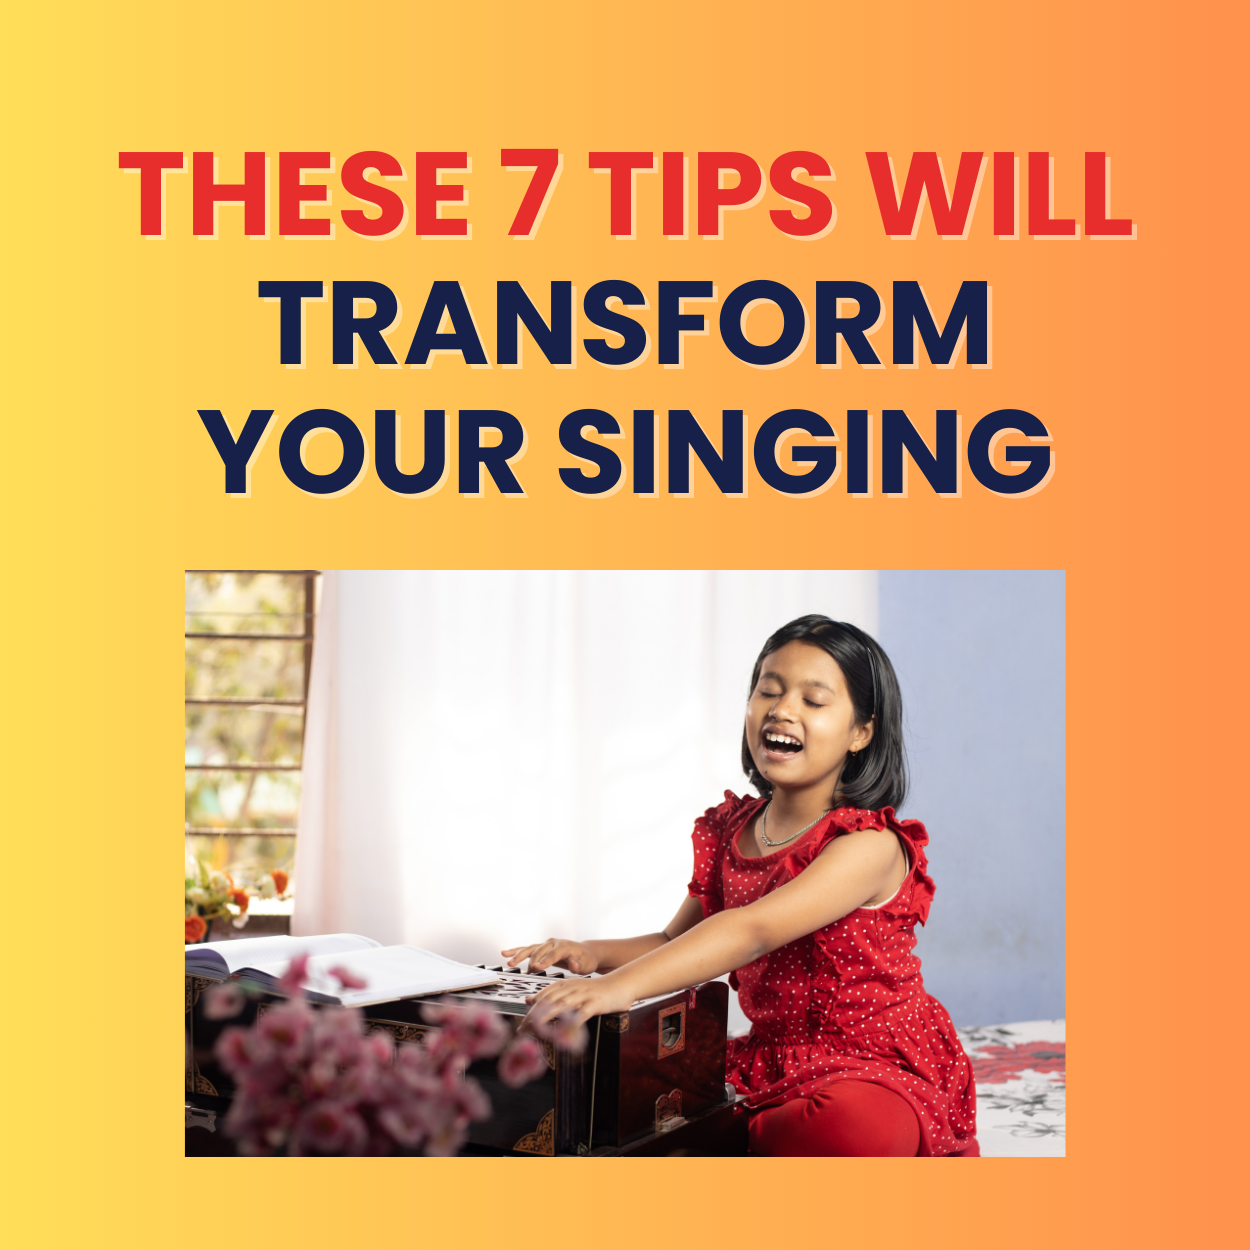 Indian Classical Students - These 7 Tips will Transform Your Singing